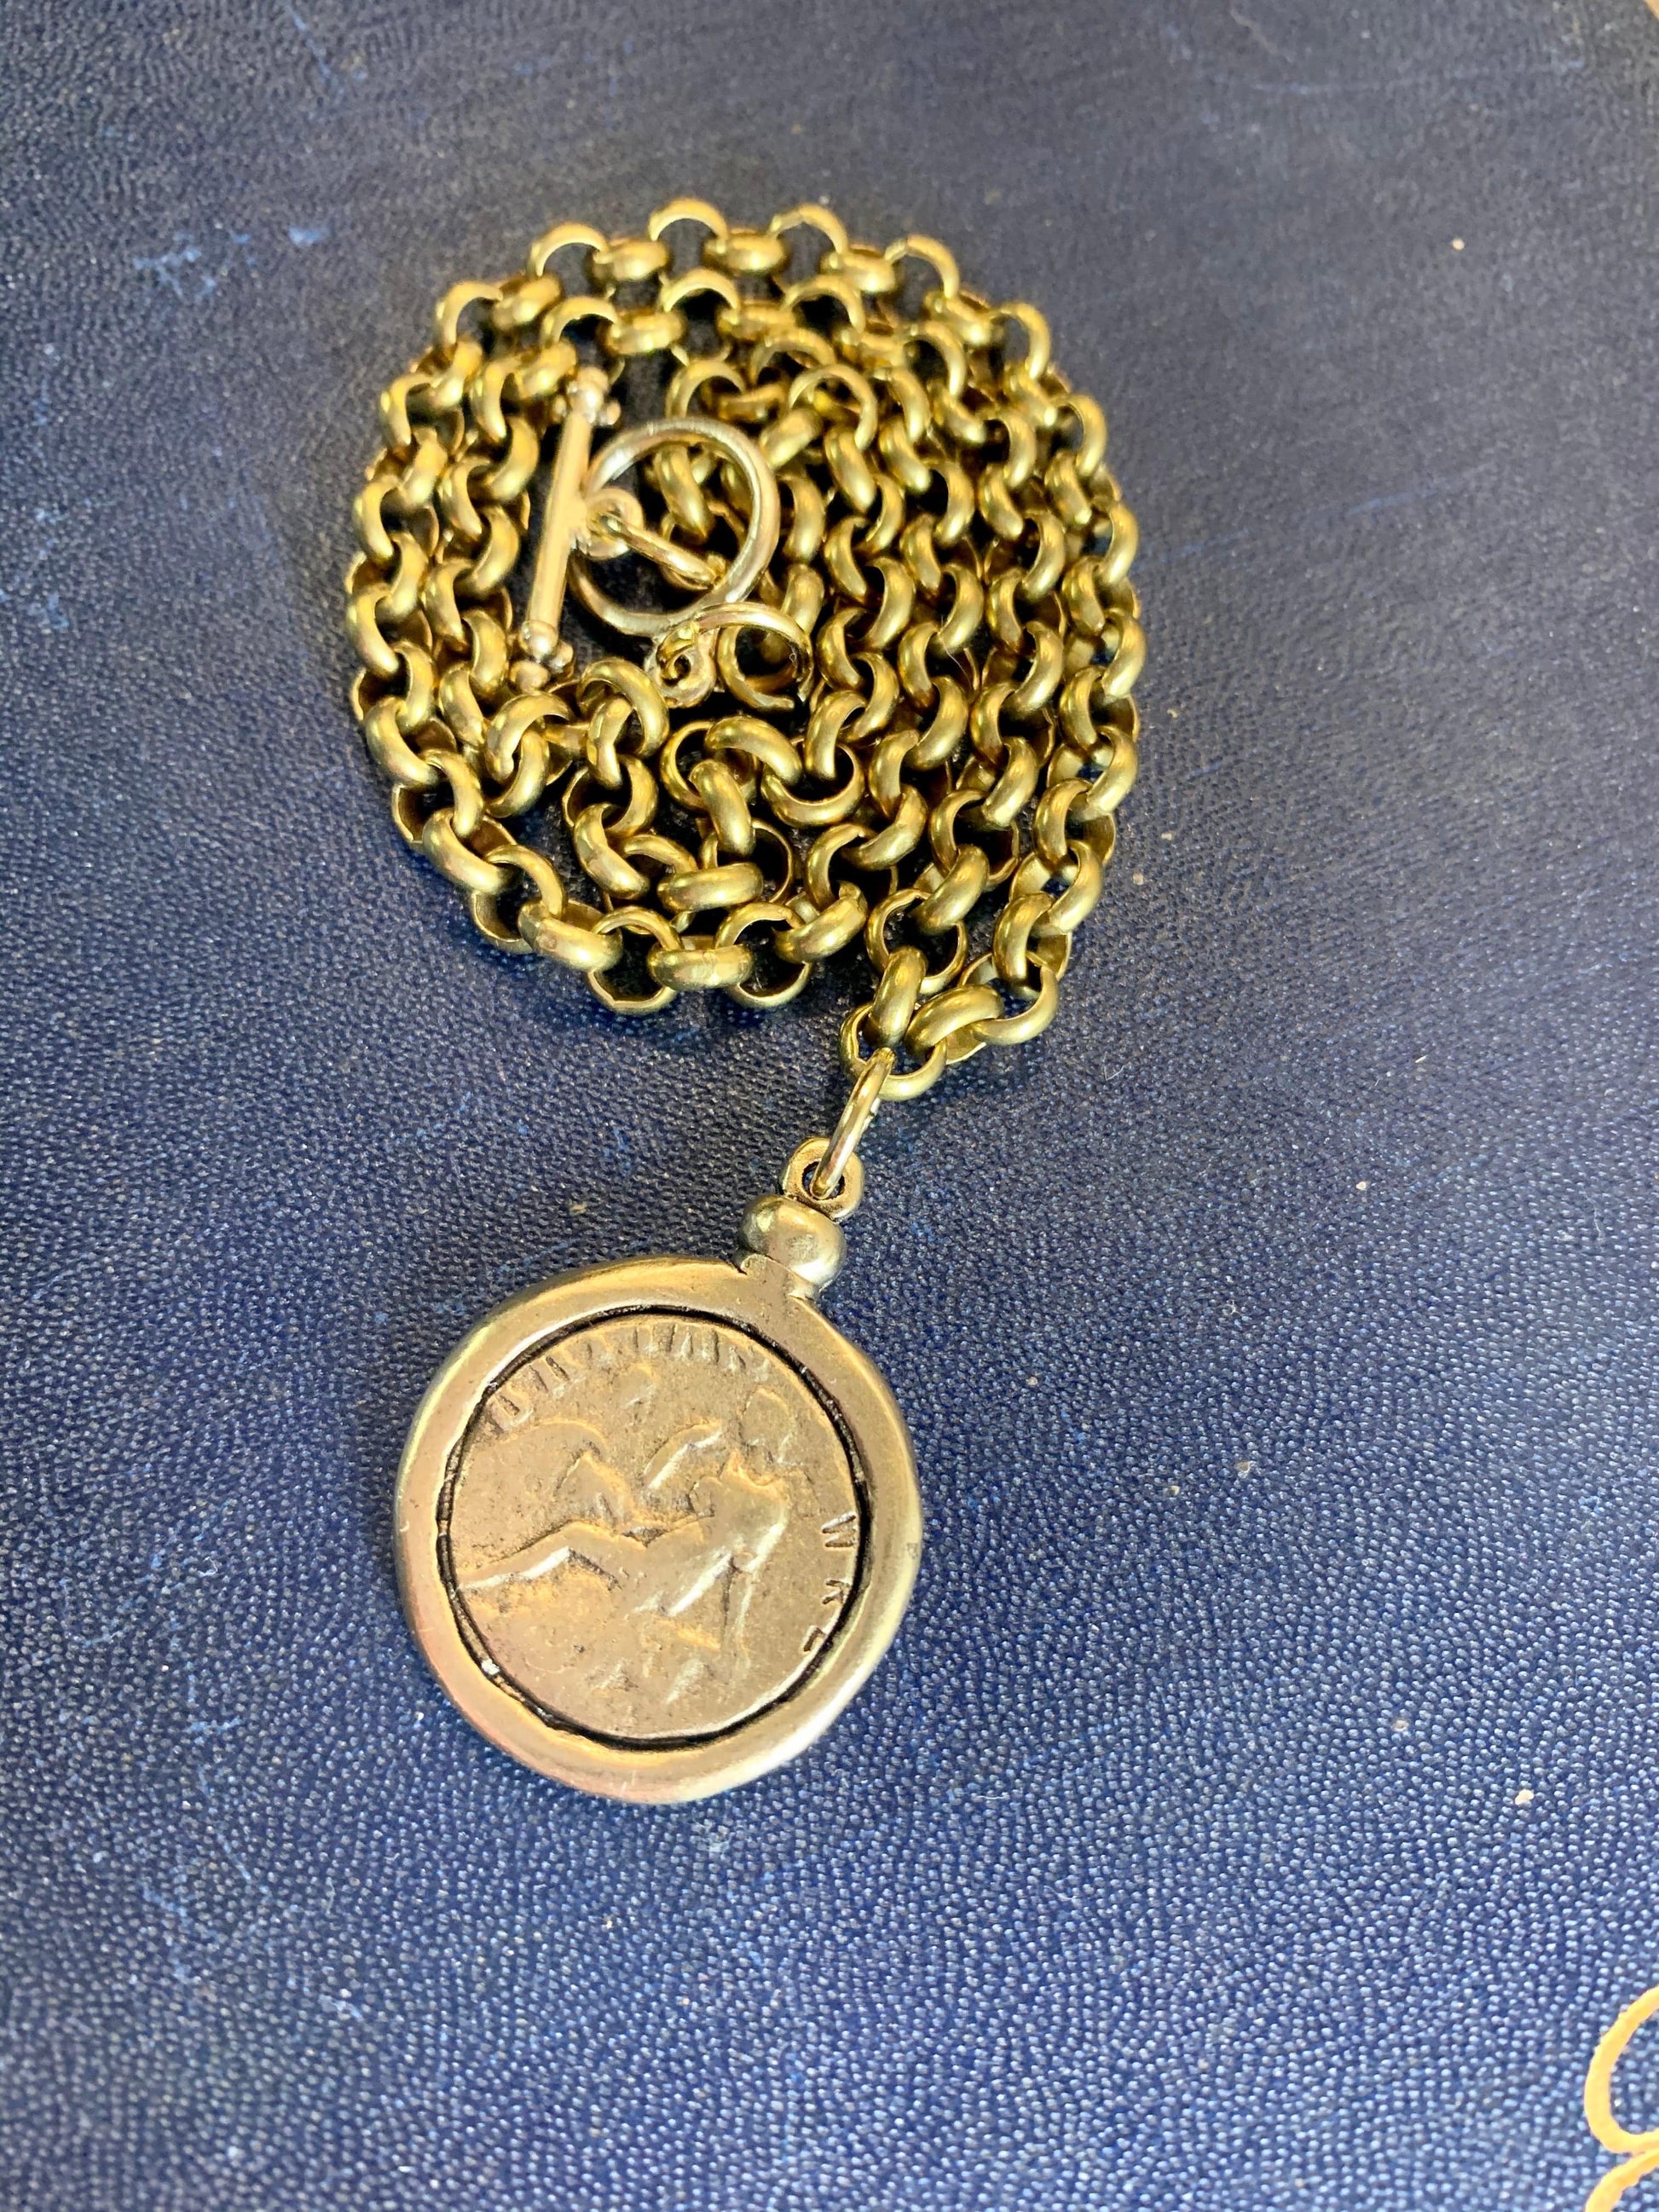 Old World Greek Coin Replica on antique brass roll chain with toggle clasp - Deep South Originals